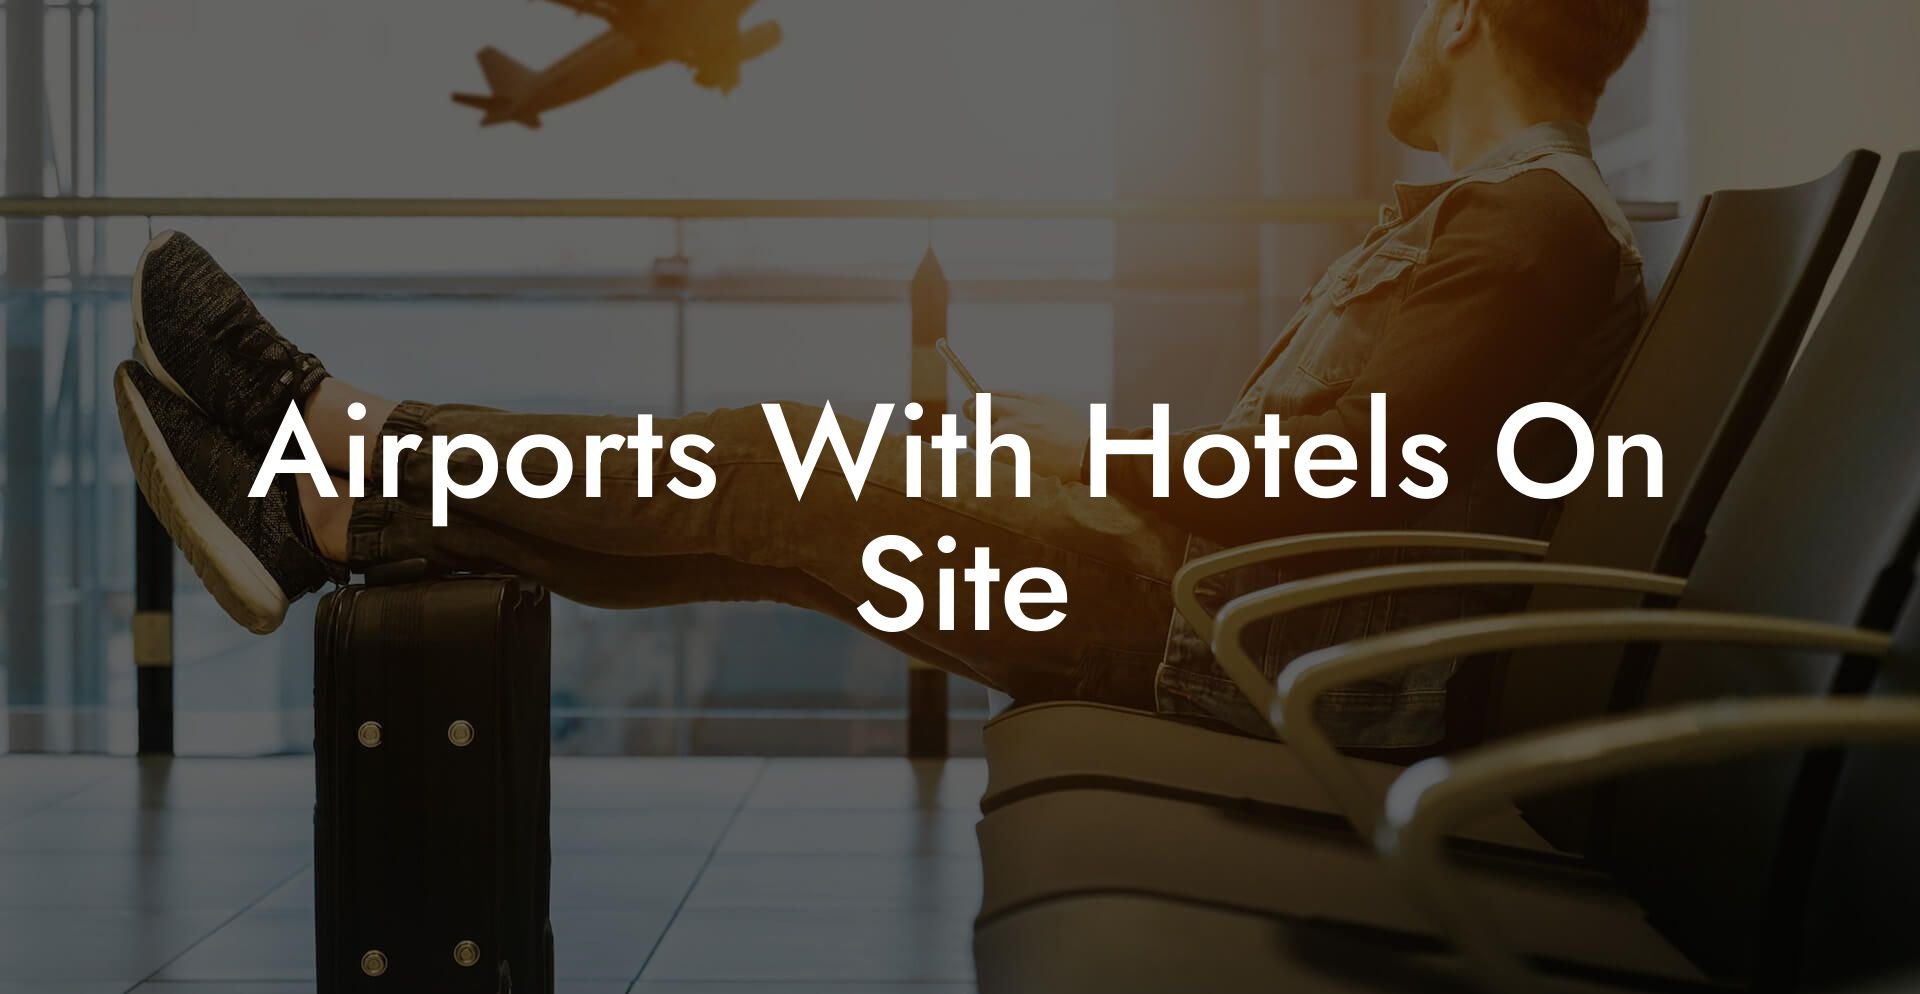 Airports With Hotels On Site